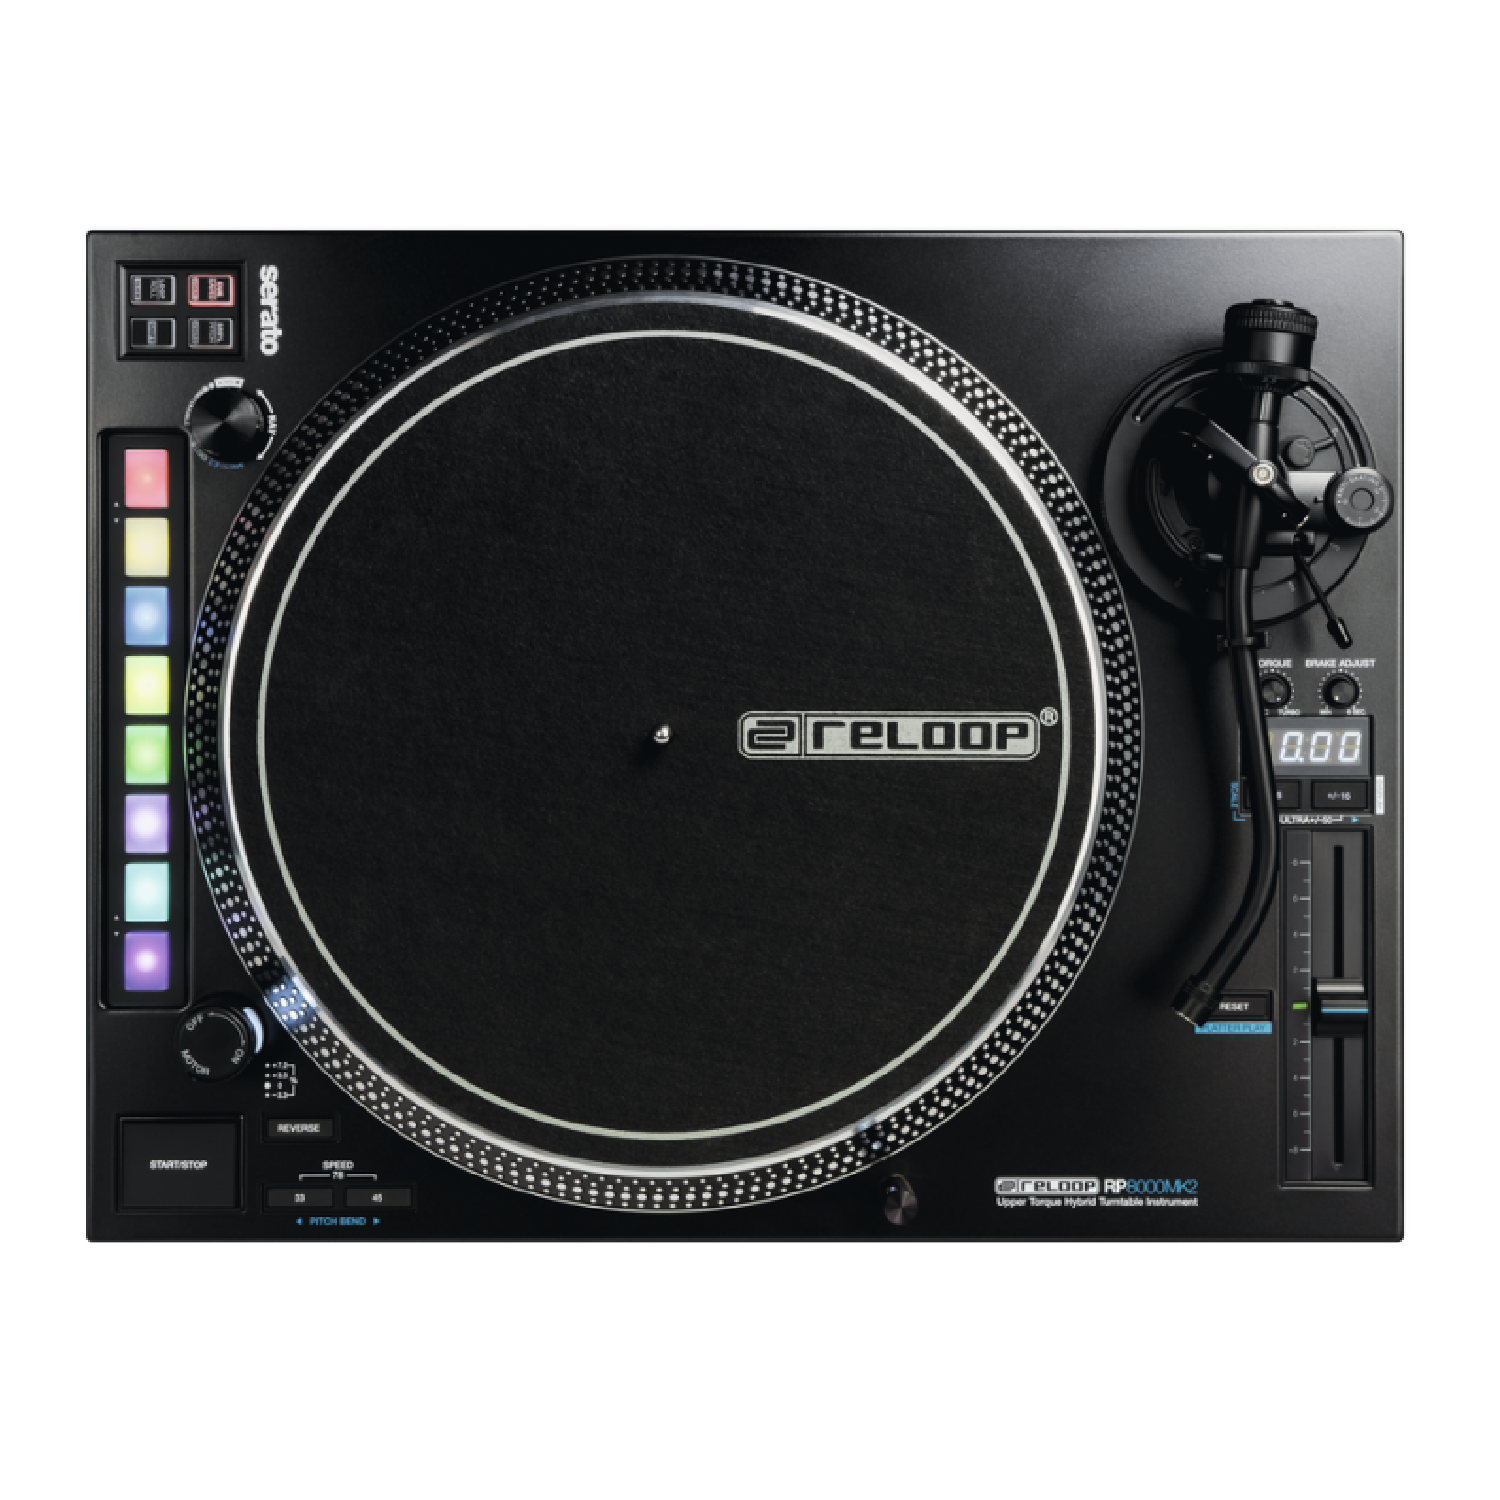 Serato DJ Pro Control 7 New Colour Coded   RELOOP RP8000 MK2 DJ TURNTABLE reloop